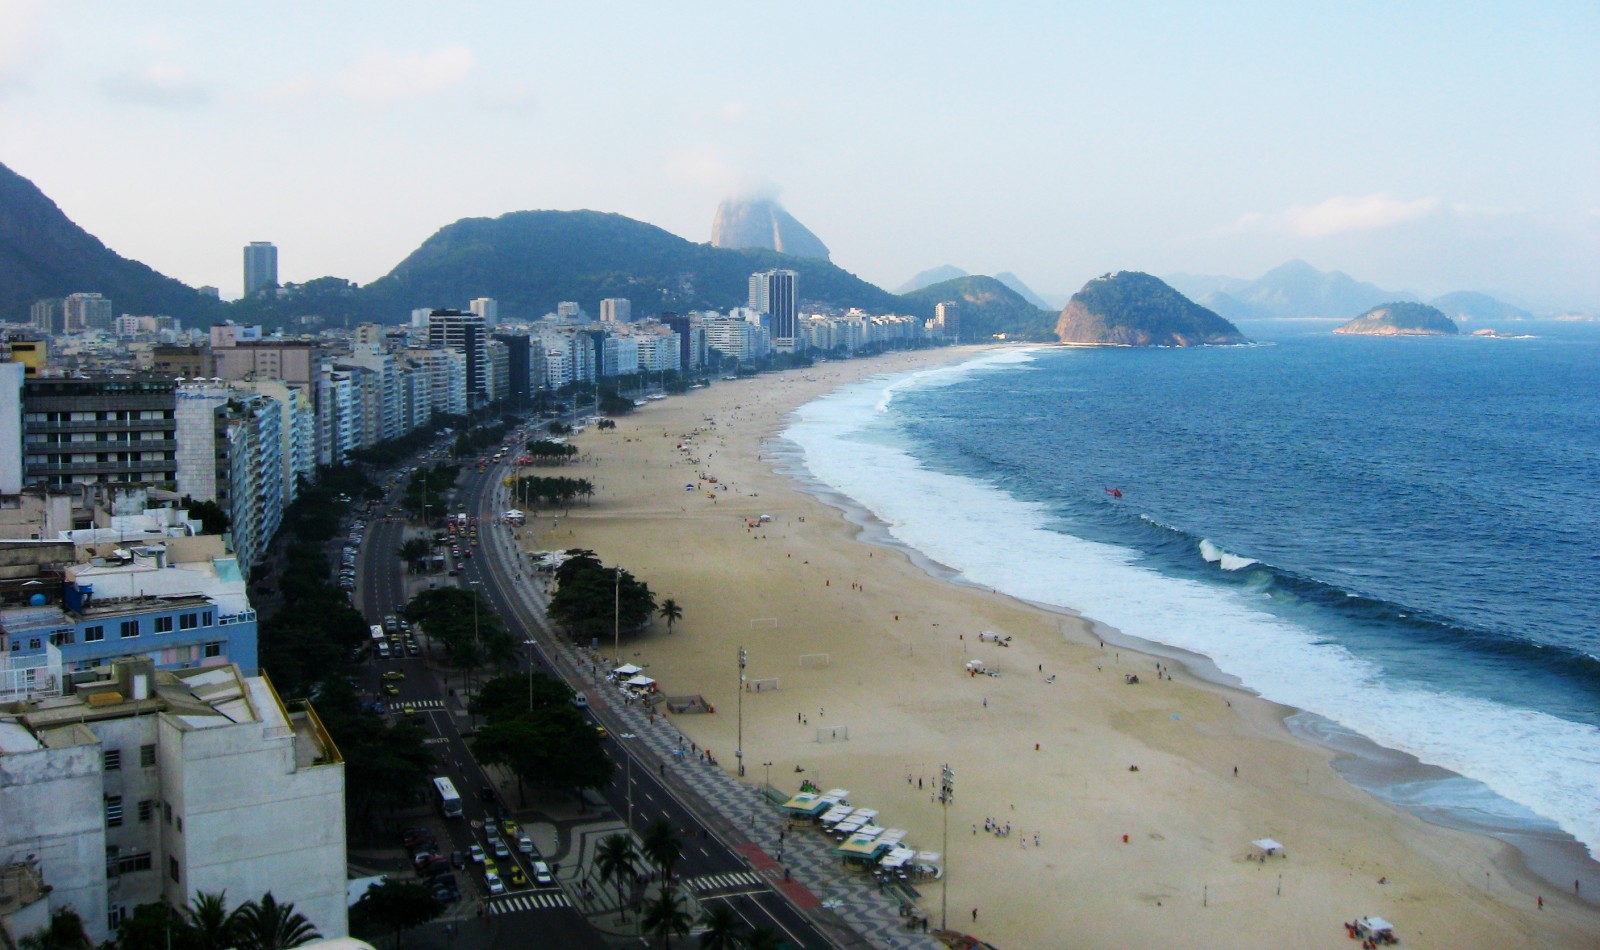 Water quality challenges in Rio have also sparked dialogue about how to tackle pollution in other cities around the world contending with the effects of rapid urbanization. Photo courtesy José Murilo via Flickr Creative Commons 